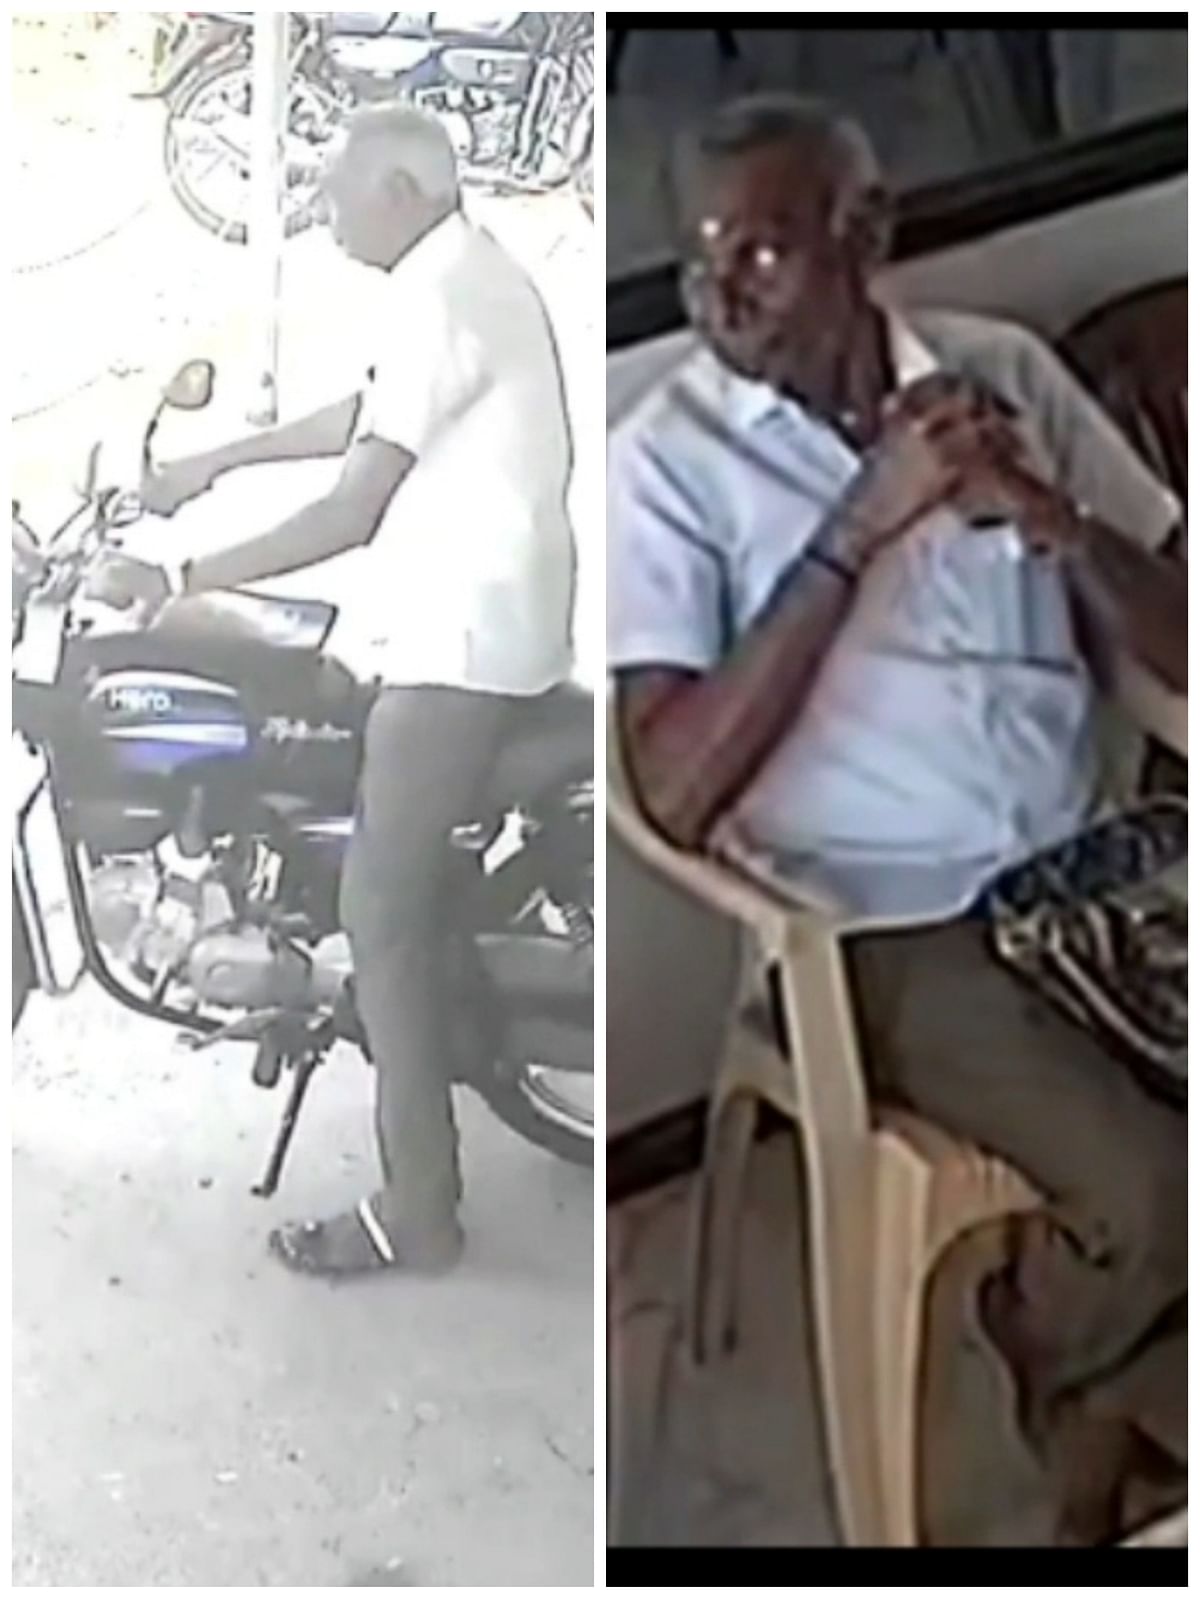 Two Wheeler Theft - Honor the old man who stole it by garlanding it